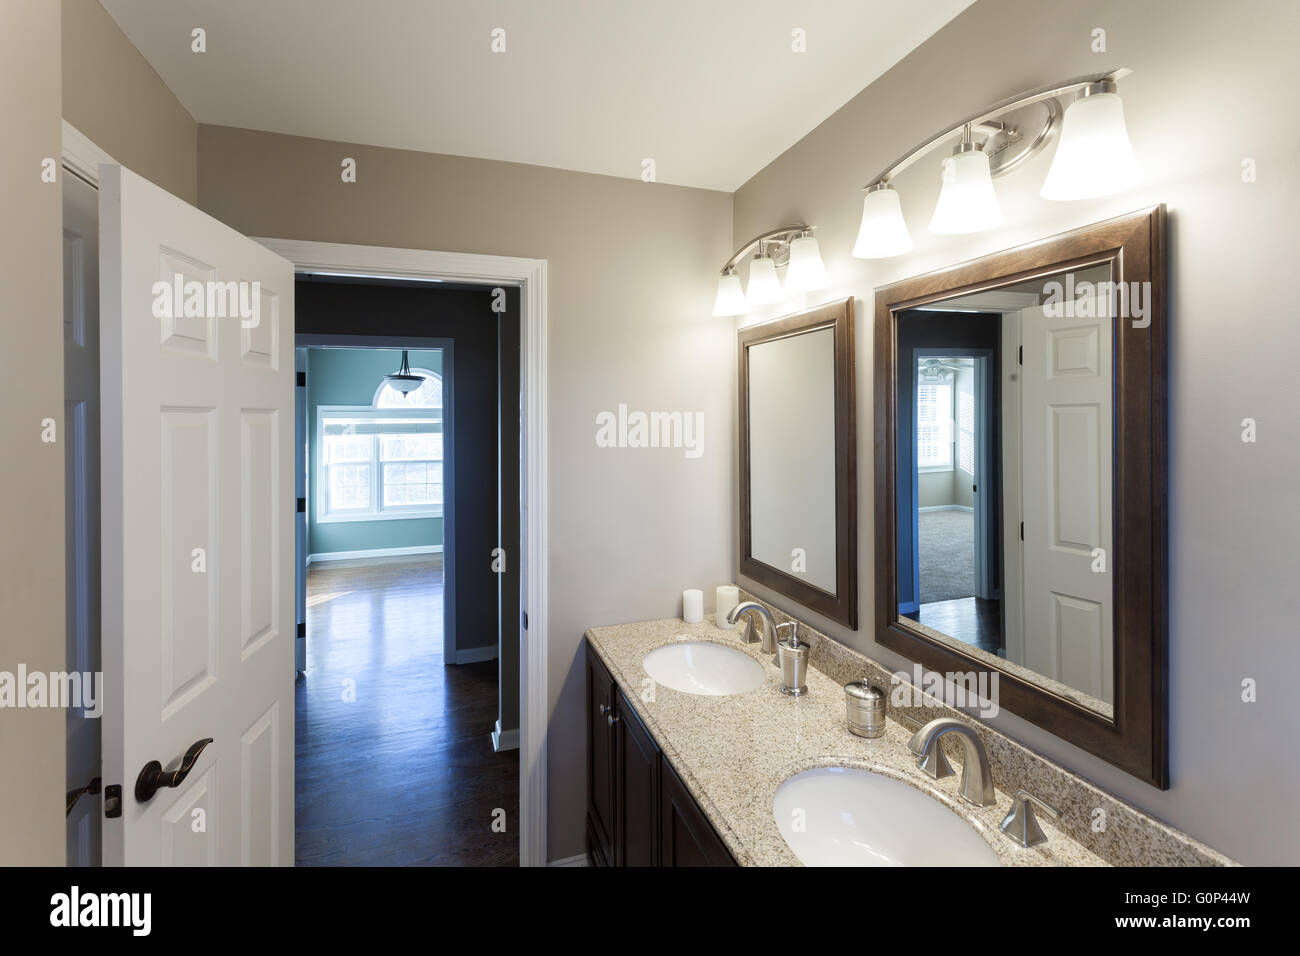 Beautiful staged interior bathroom room in a modern house. Stock Photo